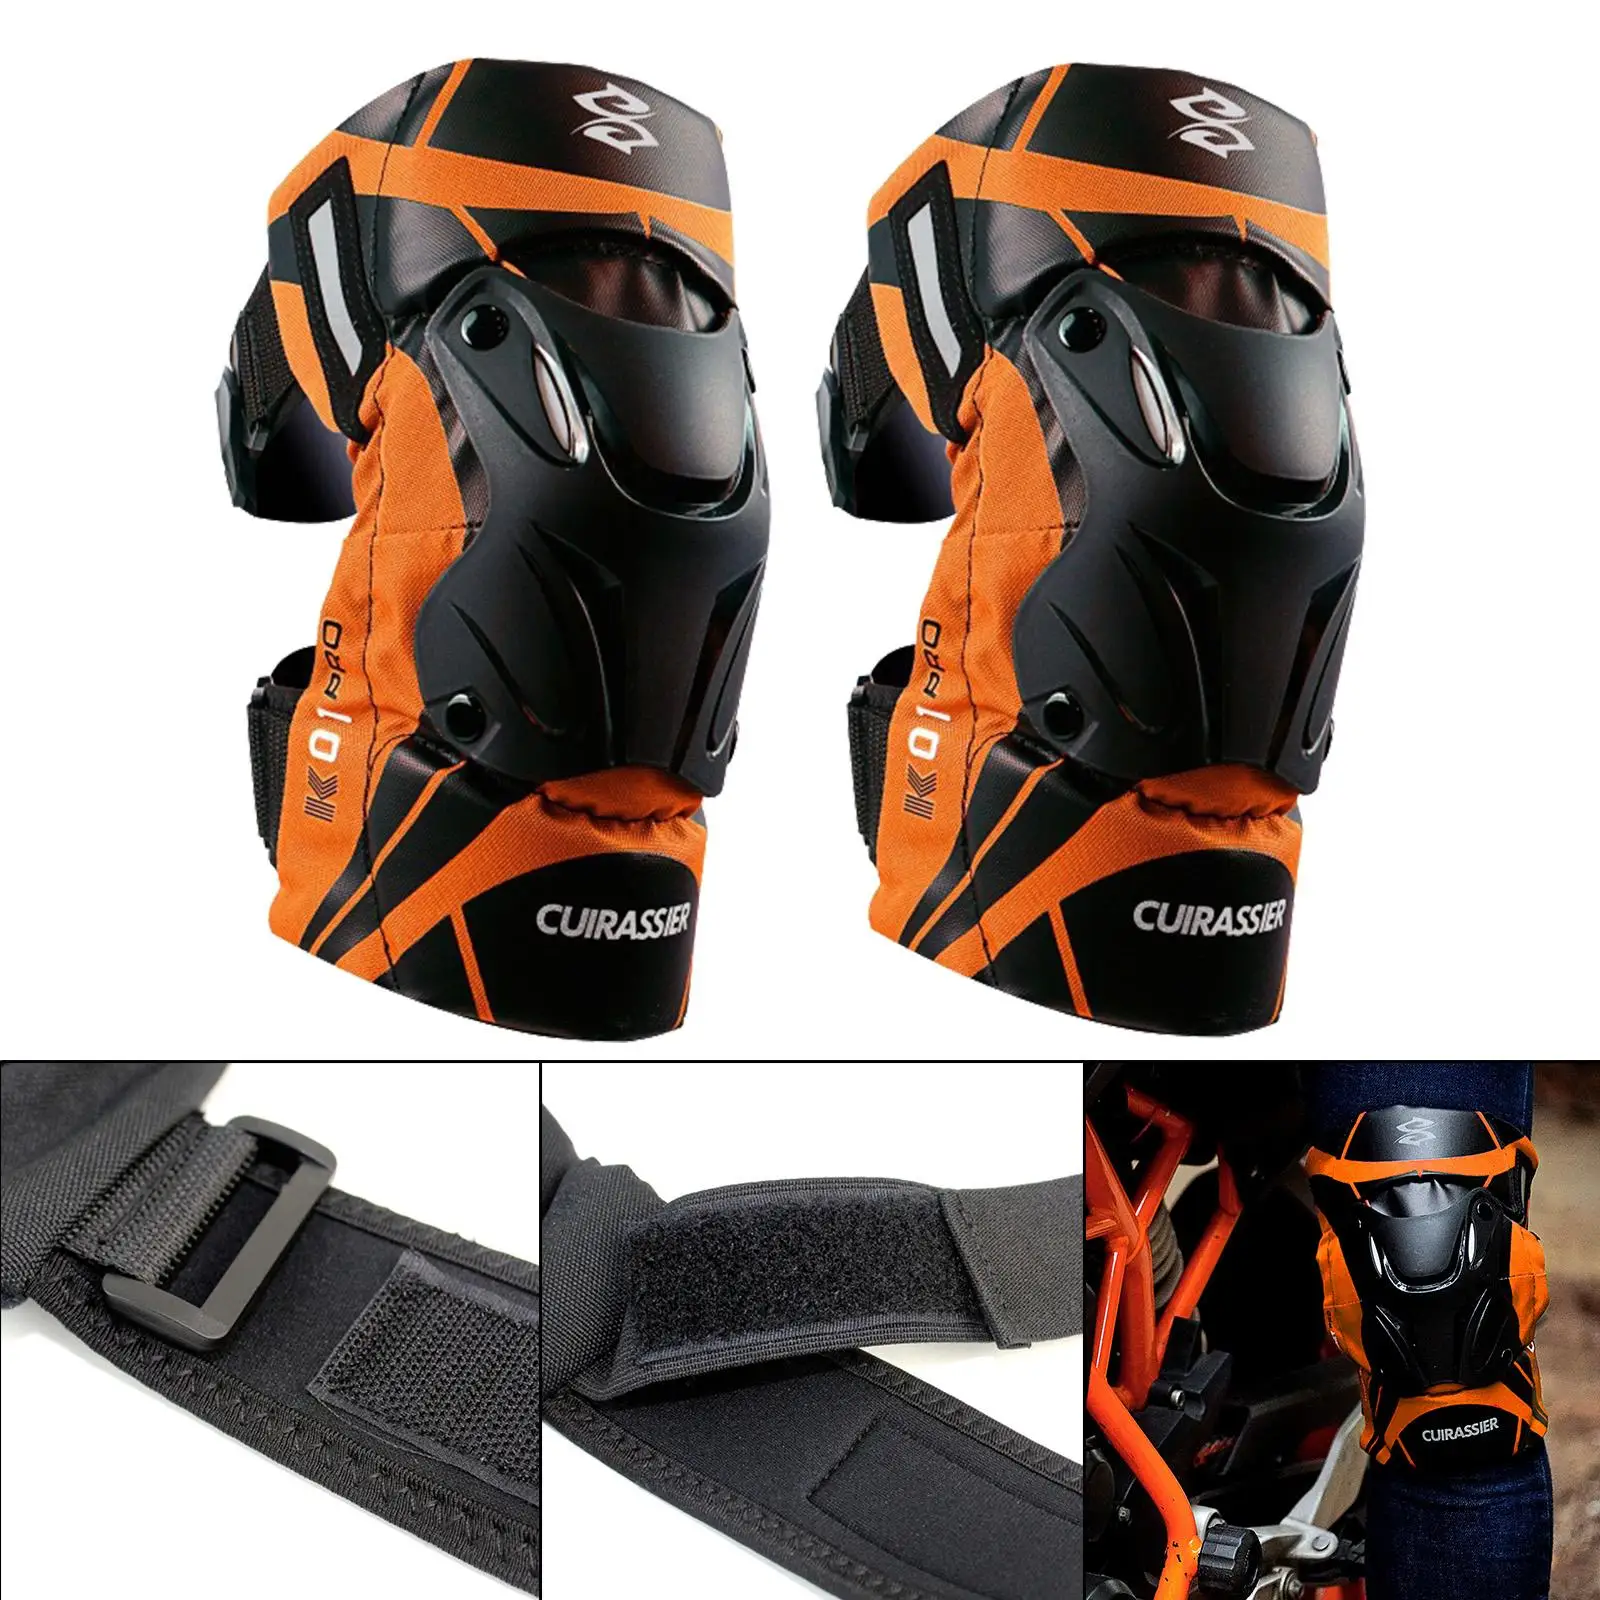 2 Pieces K01-3 Motorcycle Knee Pads Protection Adjustable Guard for Motocross Racing Unisex Reflective Moisture Proof Adult